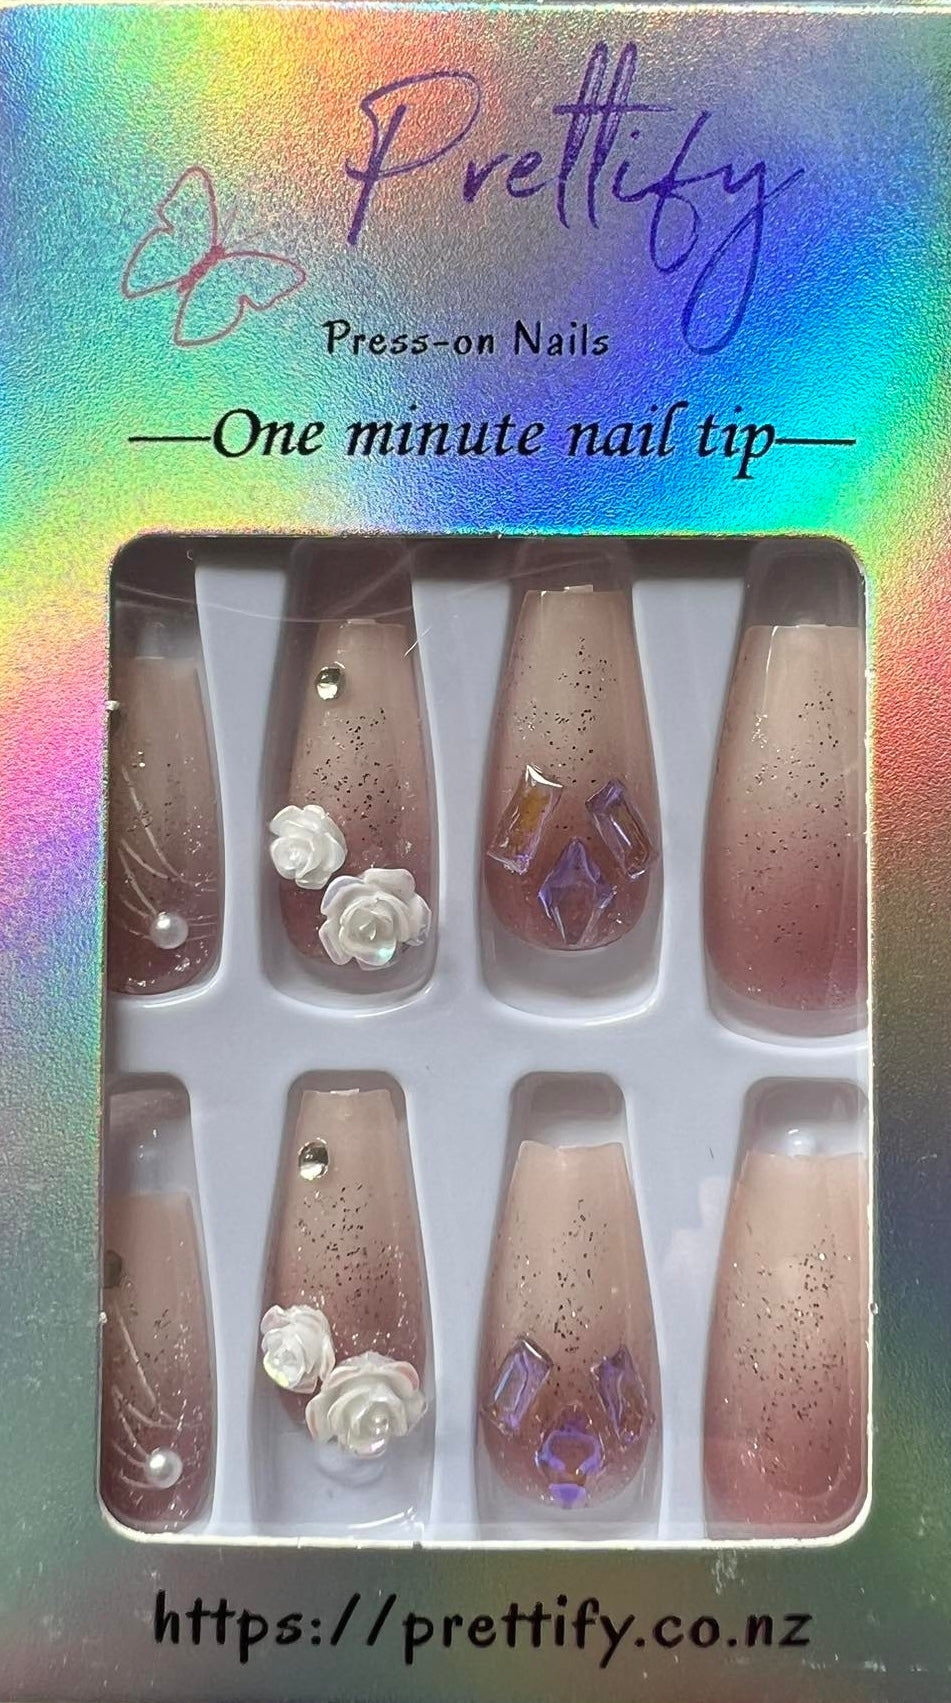 Medium Length Coffin Press on Nails. Cream/Taupe Ombre with Lilac Jewels & Glitter and White 3D Roses. Durable Acrylic Press on Nails. Easy and quick to apply. Great for those special occasions, parties or add an edge to any outfit. Gorgeous, flattering and you can re-use them again and again.